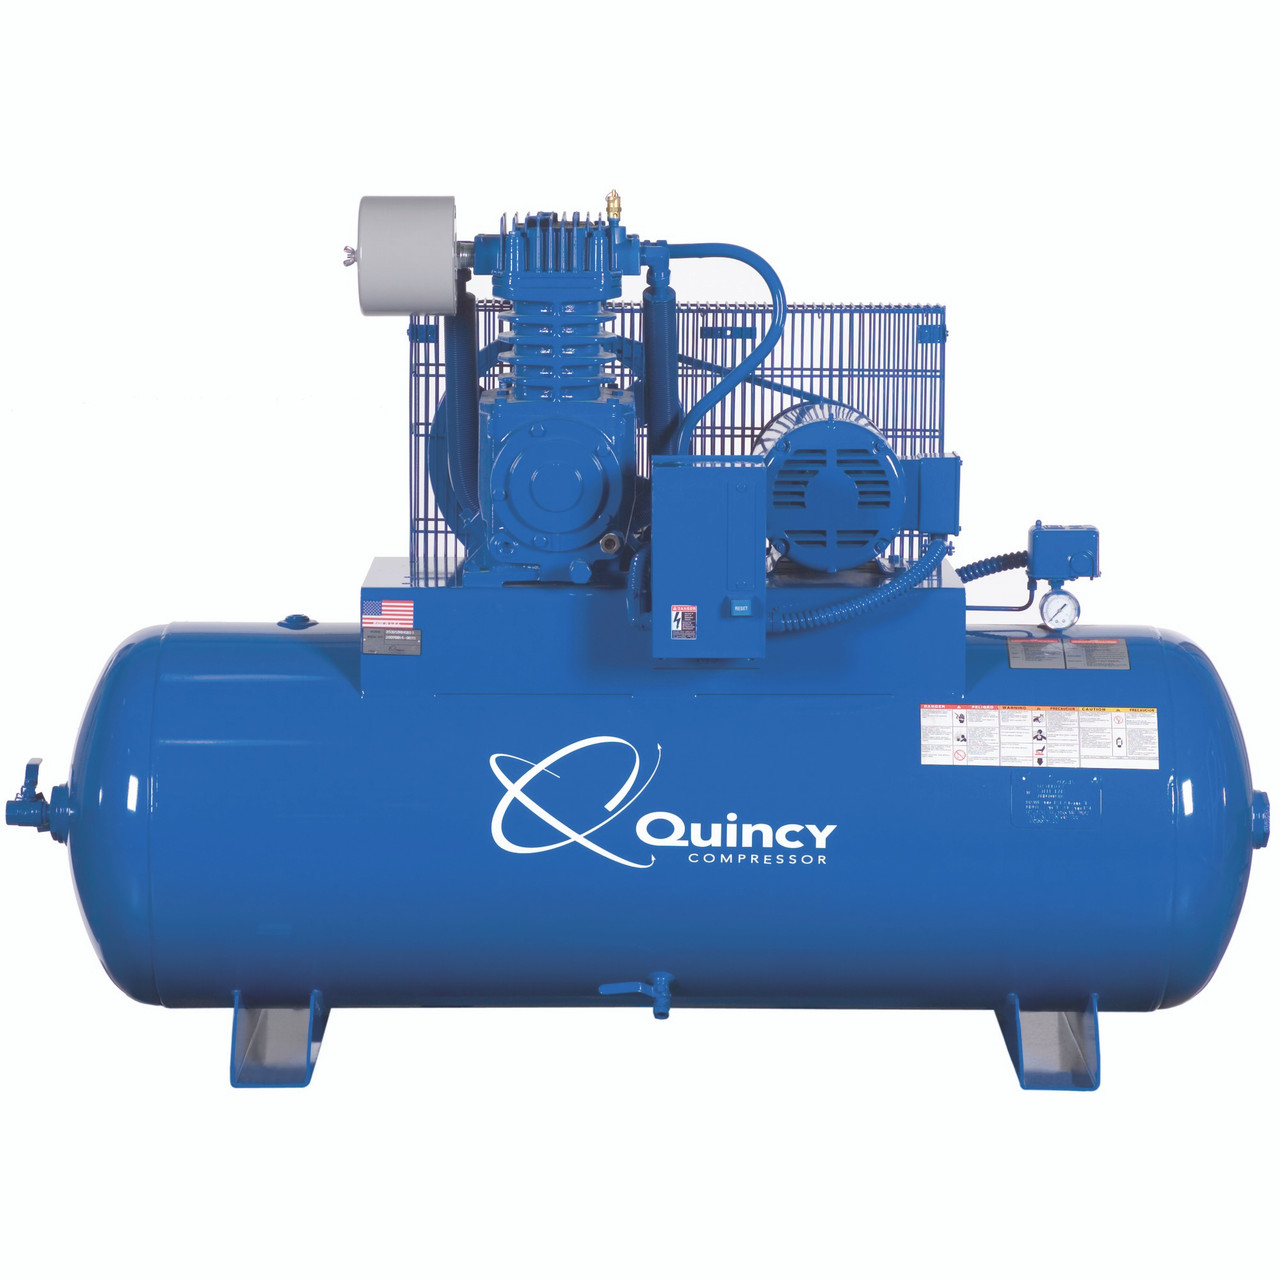 Quincy 253DS80HCB46 5 HP Pro, 460 Volt Three Phase, Two Stage, 80 Gallon Horizontal Air Compressor